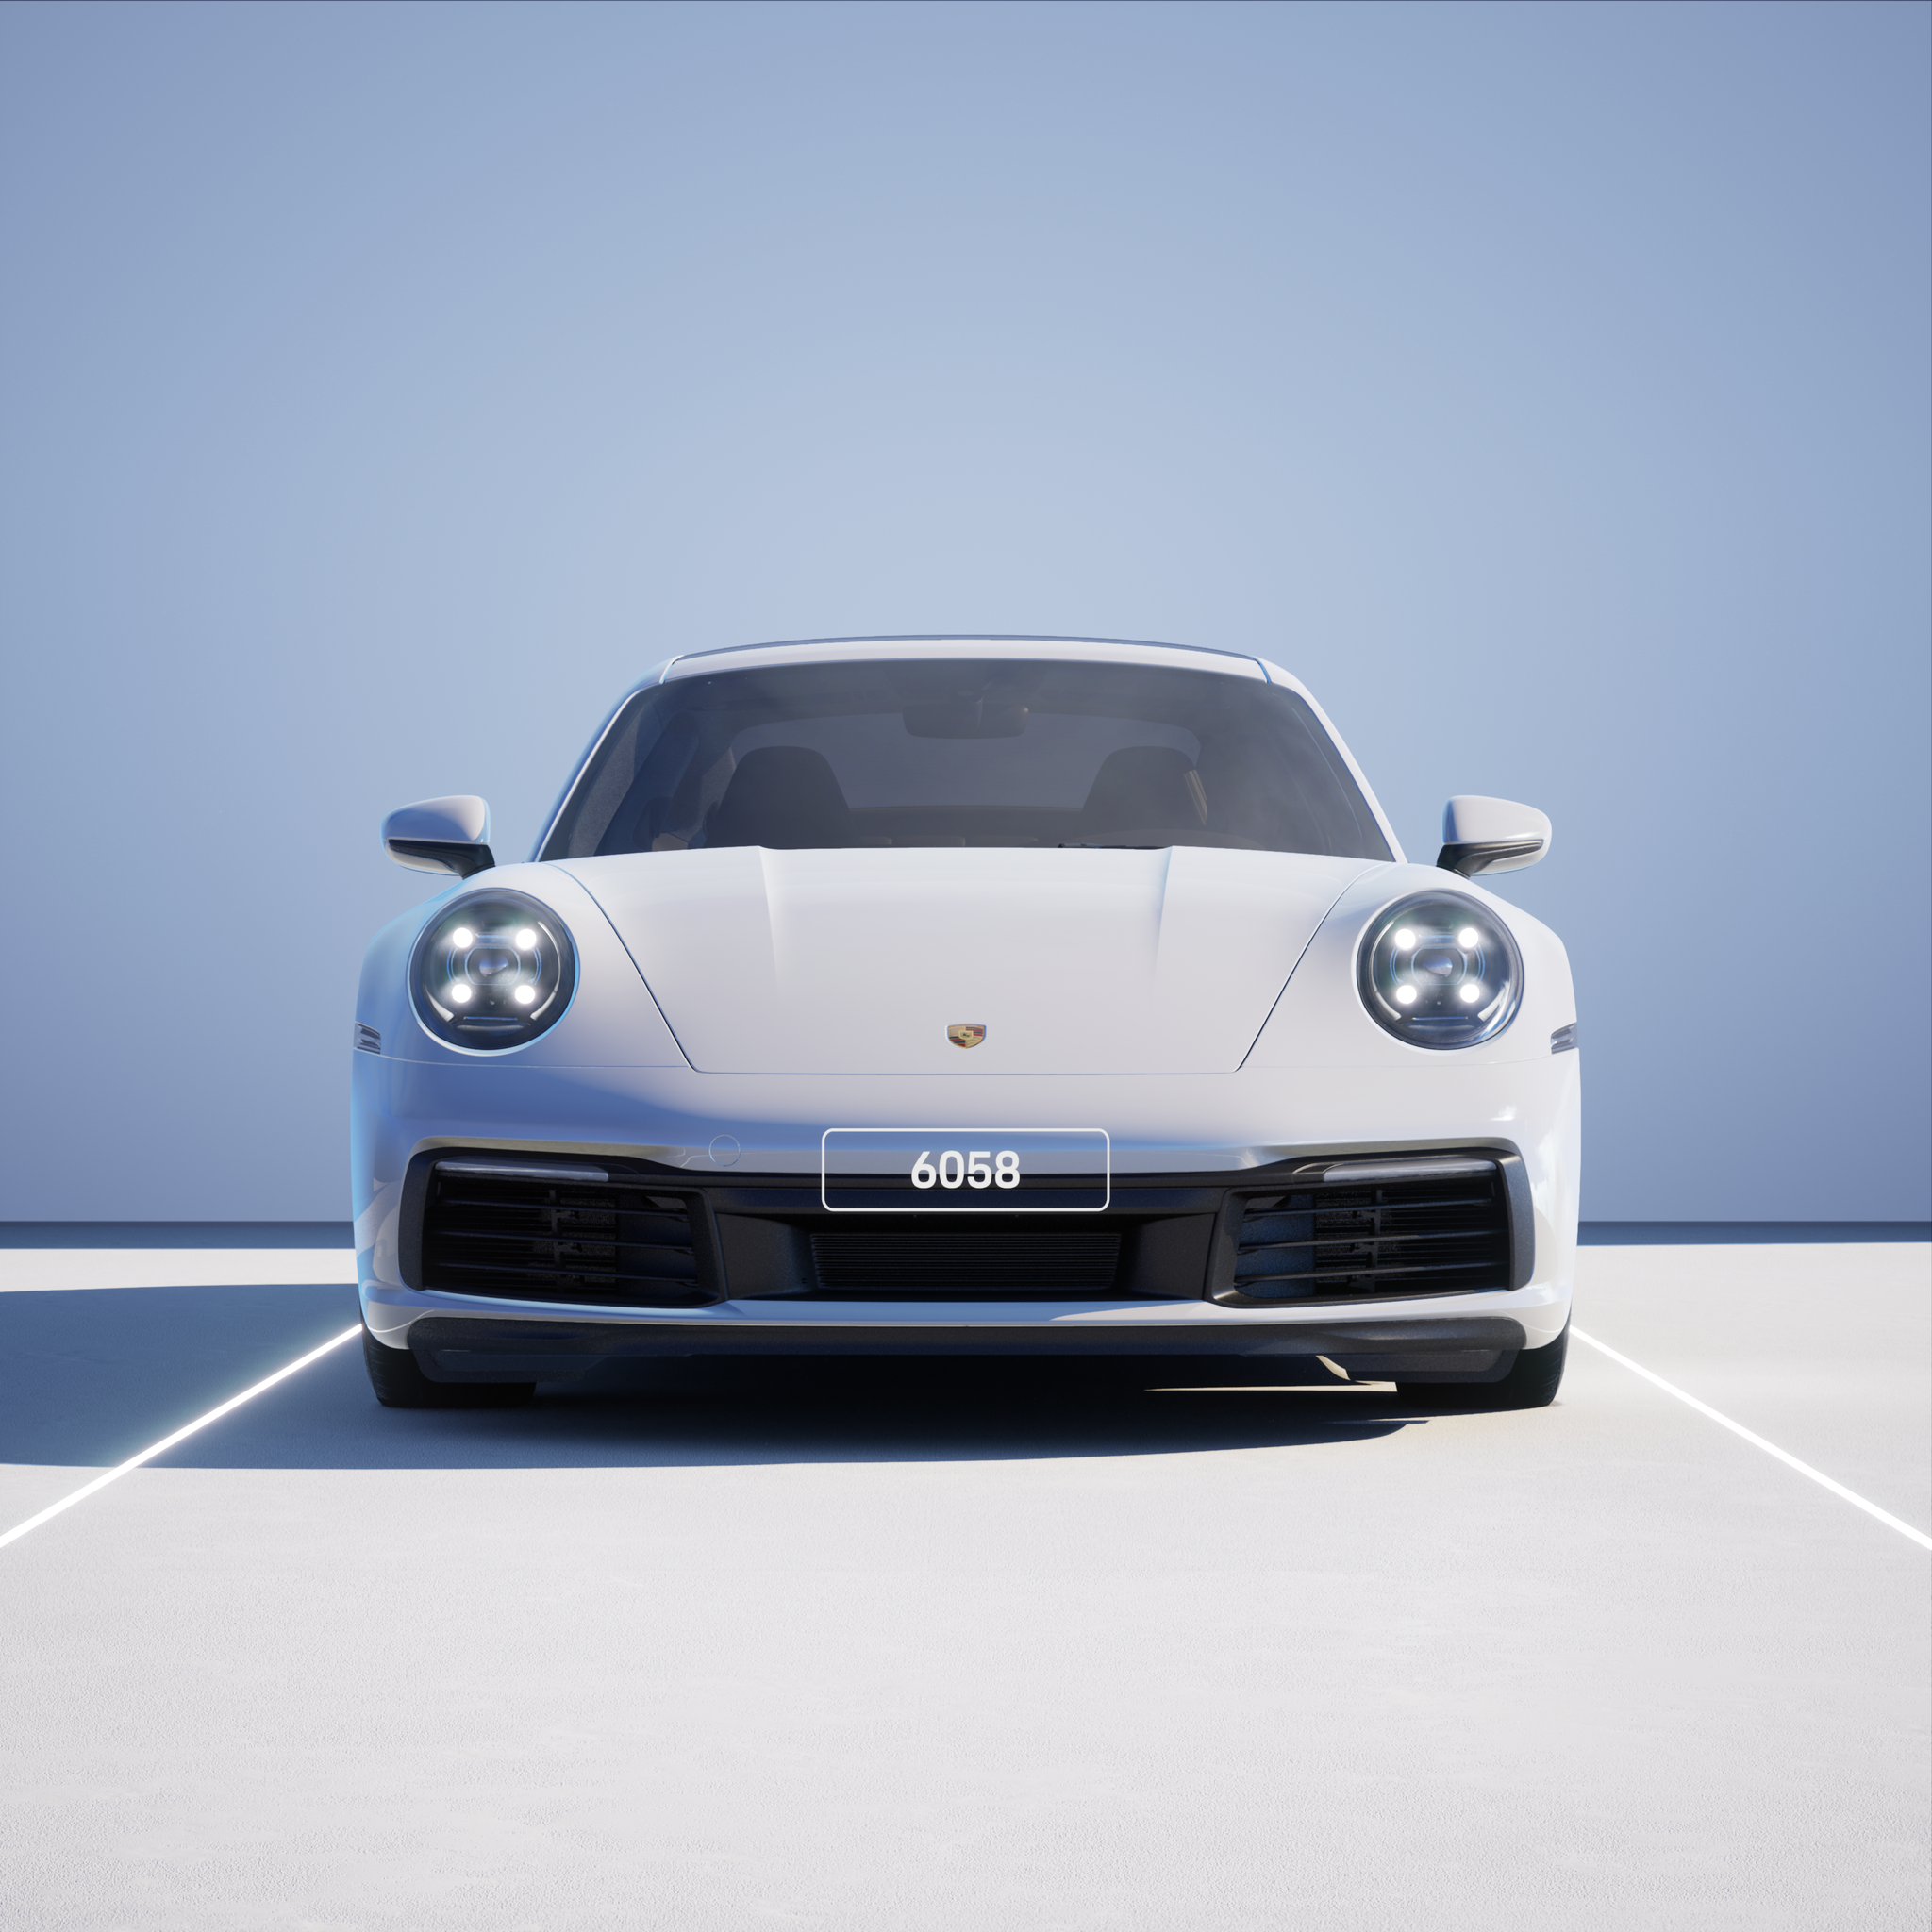 The PORSCHΞ 911 6058 image in phase